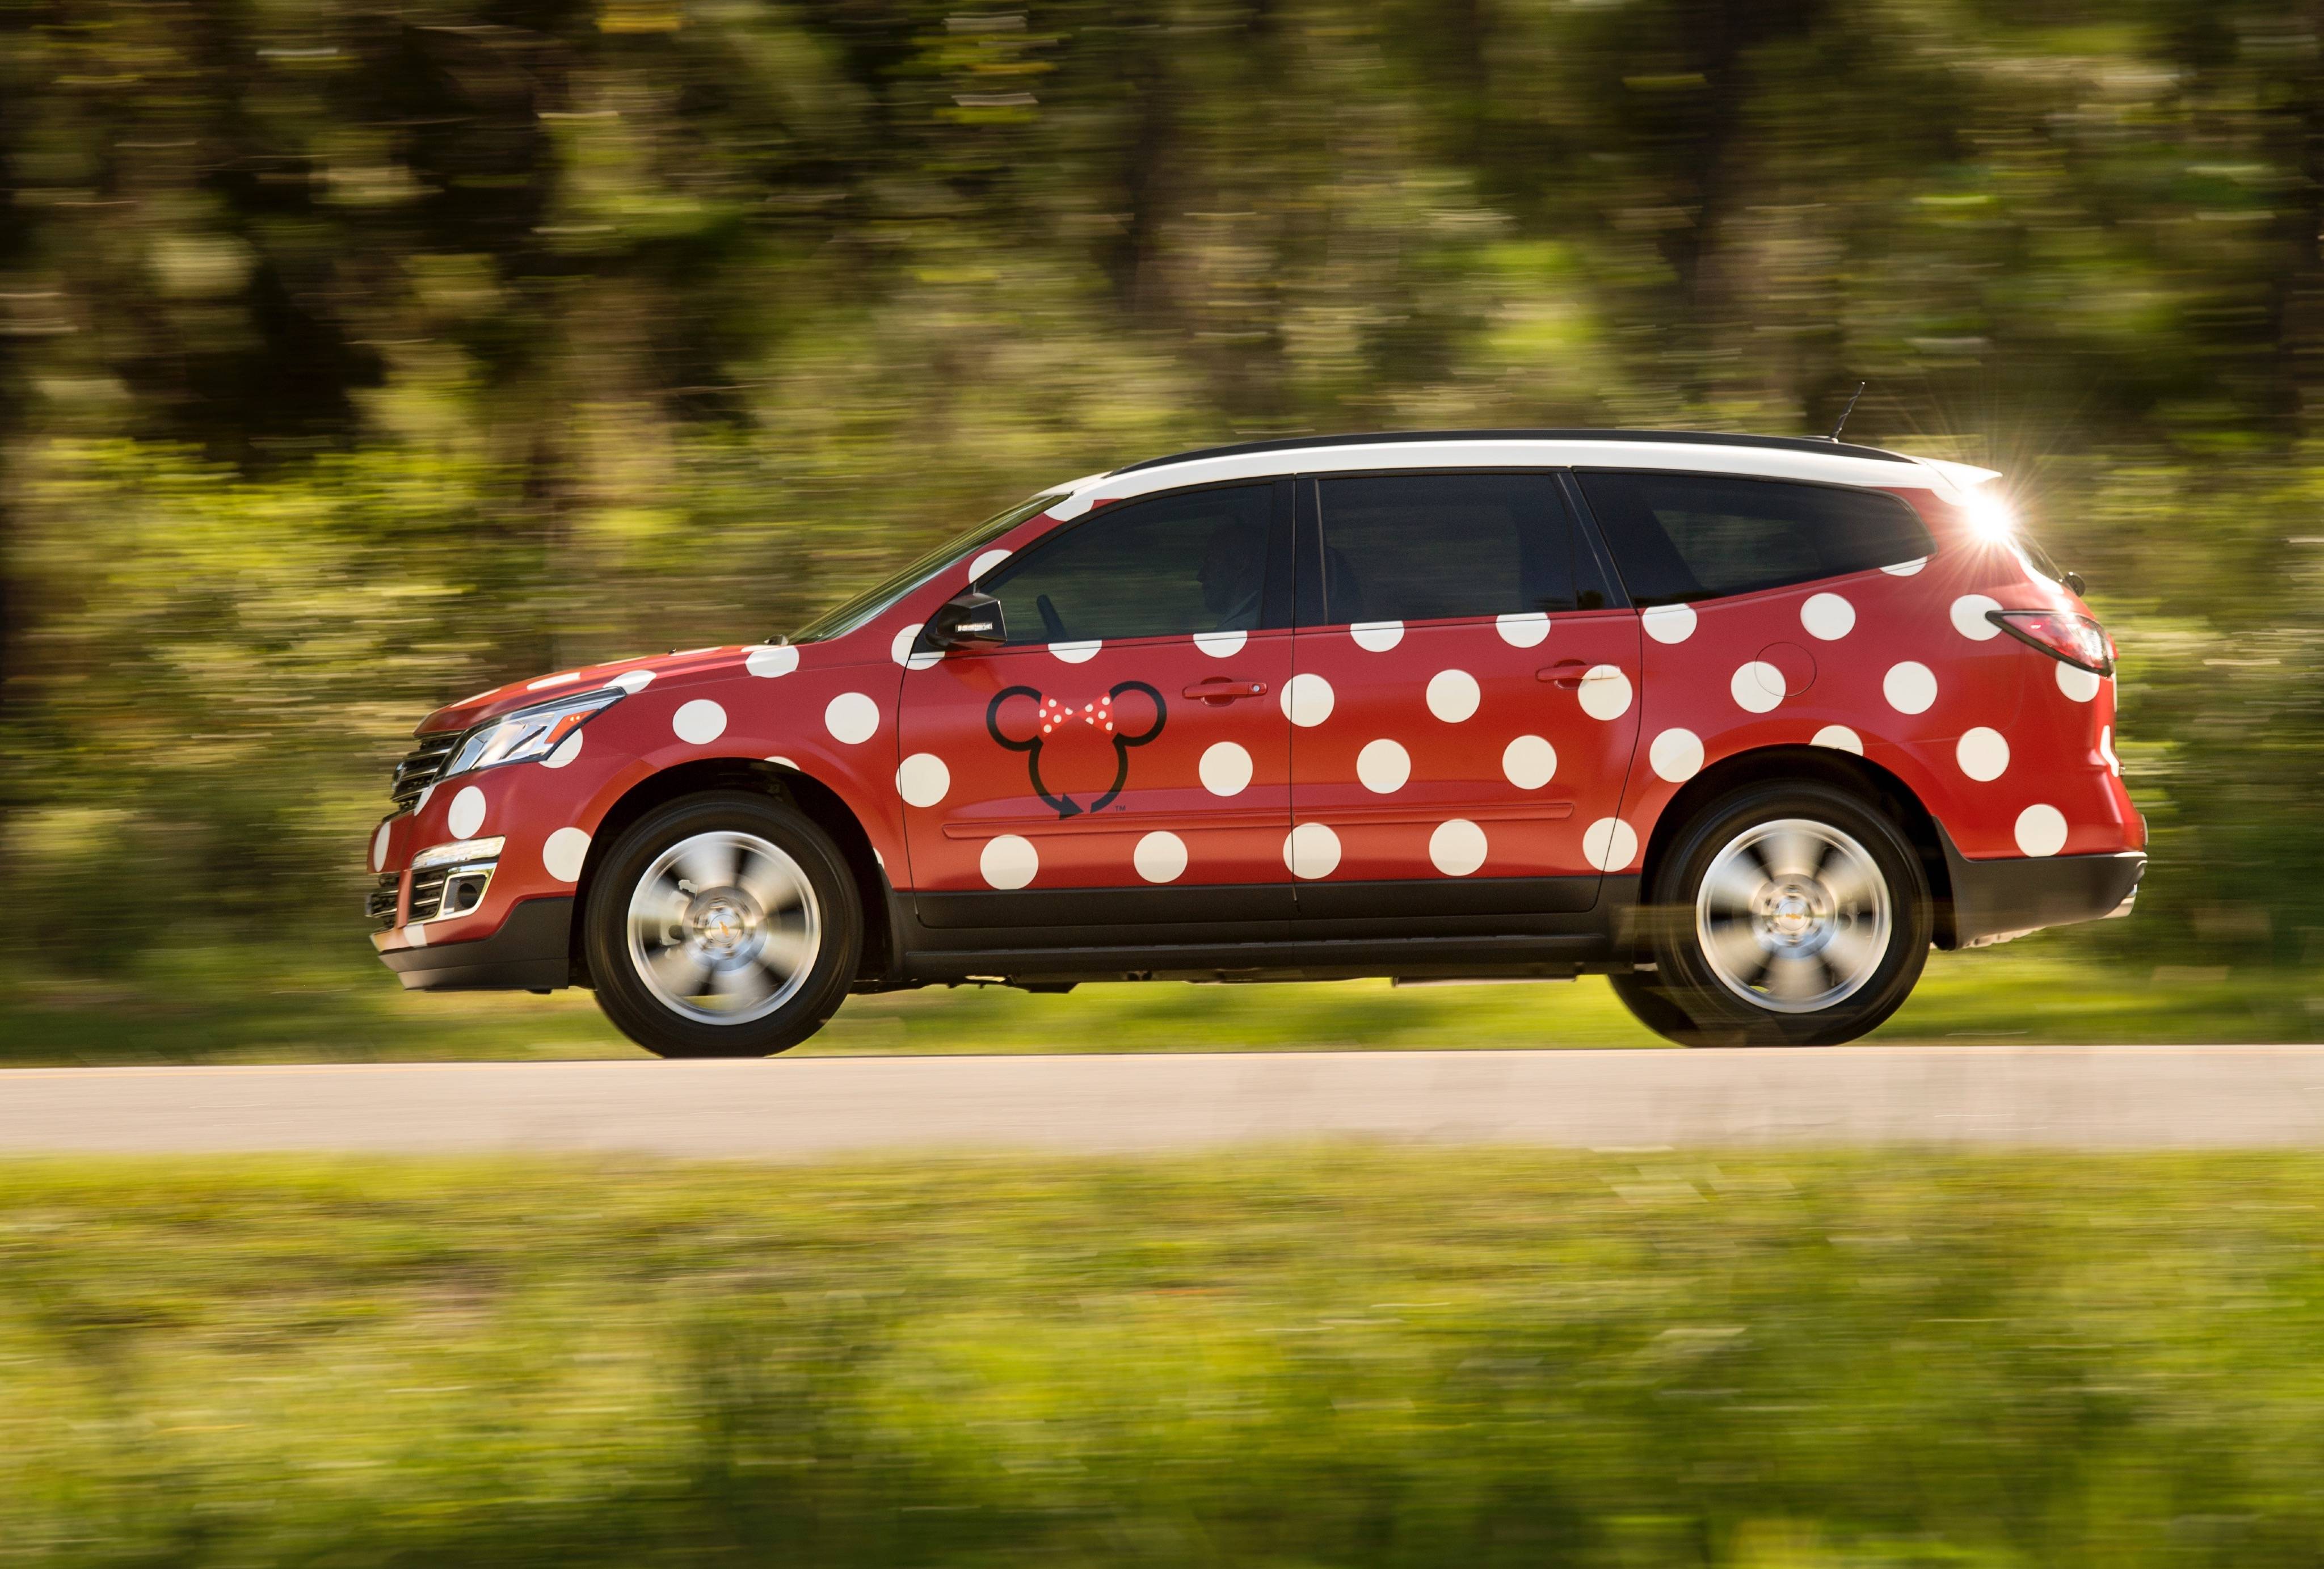 Disney to introduce its own Uber-like direct transportation service - Minnie Van